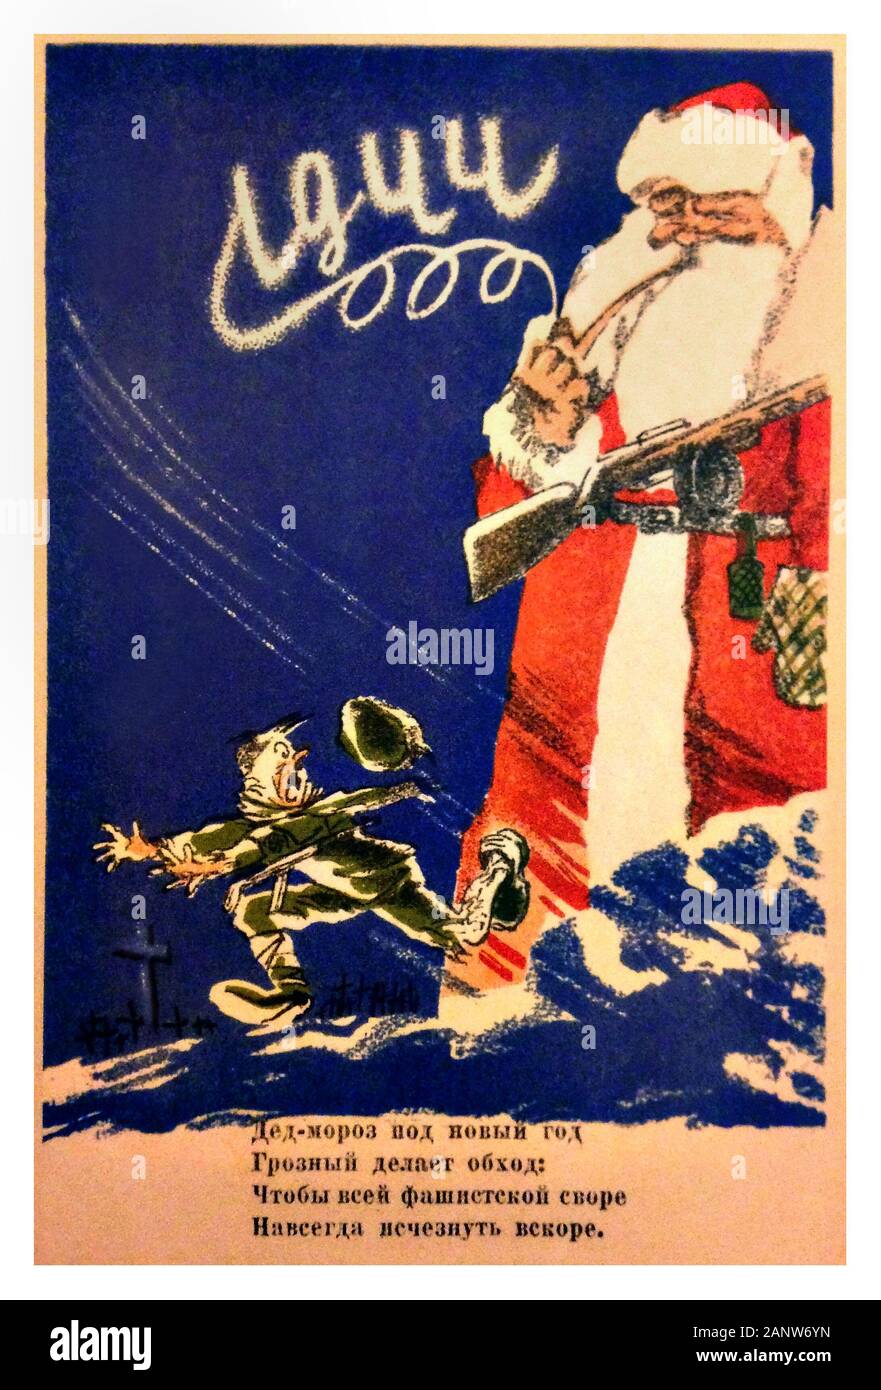 Vintage WW2 Russian Christmas Propaganda Greeting Card and New Year's card. 1944 Father Christmas Character smoking a pipe. 'Grandfather Frost, Makes a Fearsome Tour, To Get The Entire Pack of Fascists, To Disappear Forever Soon... Stock Photo